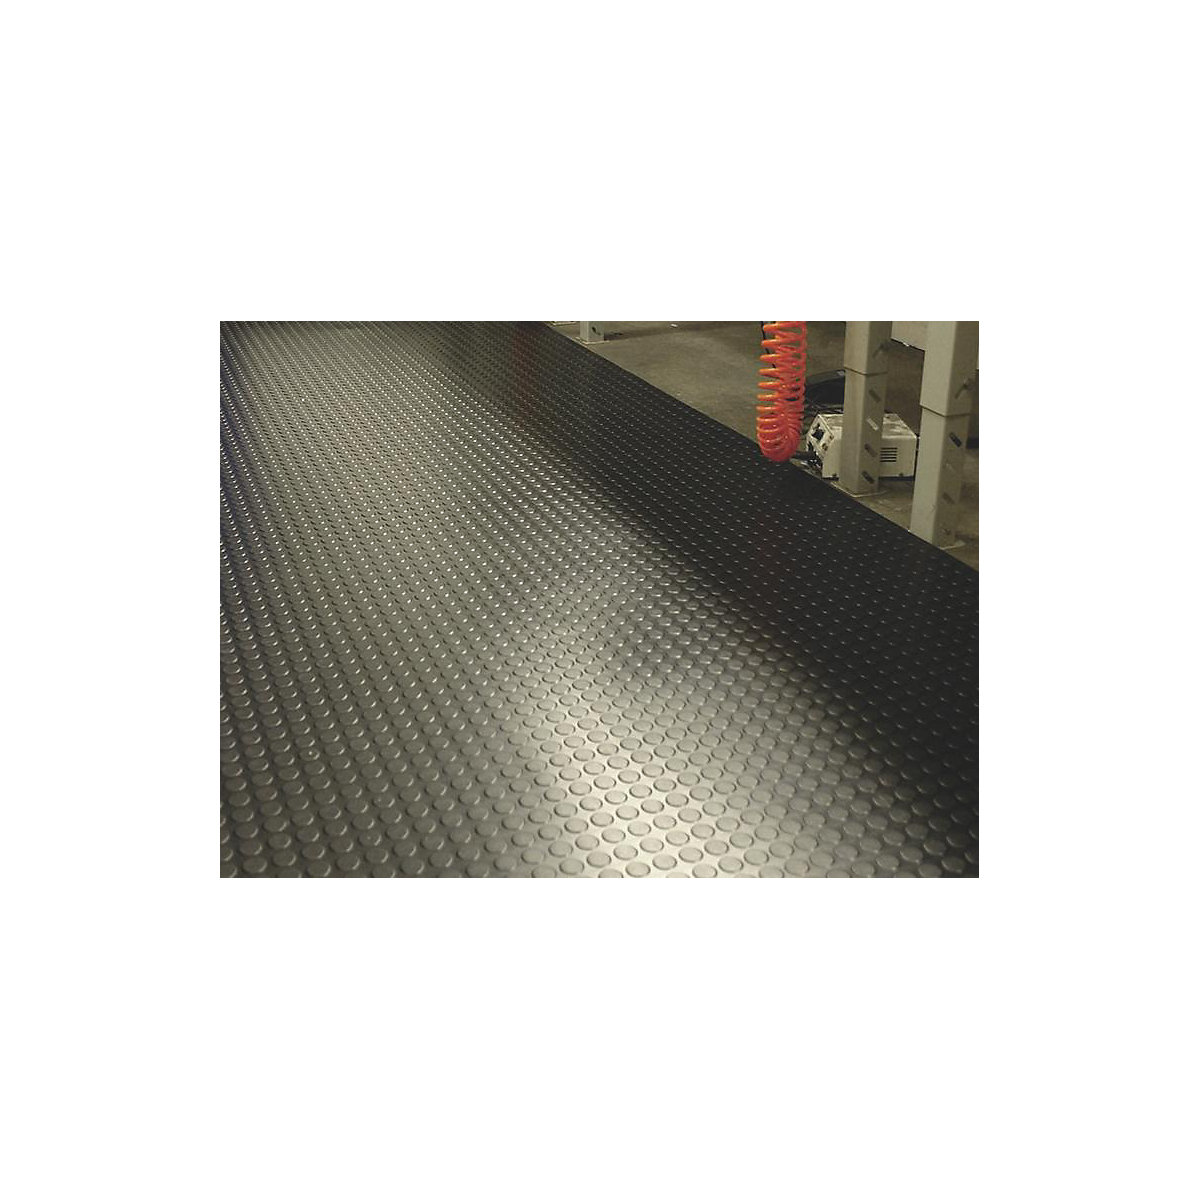 COBAdot natural rubber matting with nitrile component - COBA